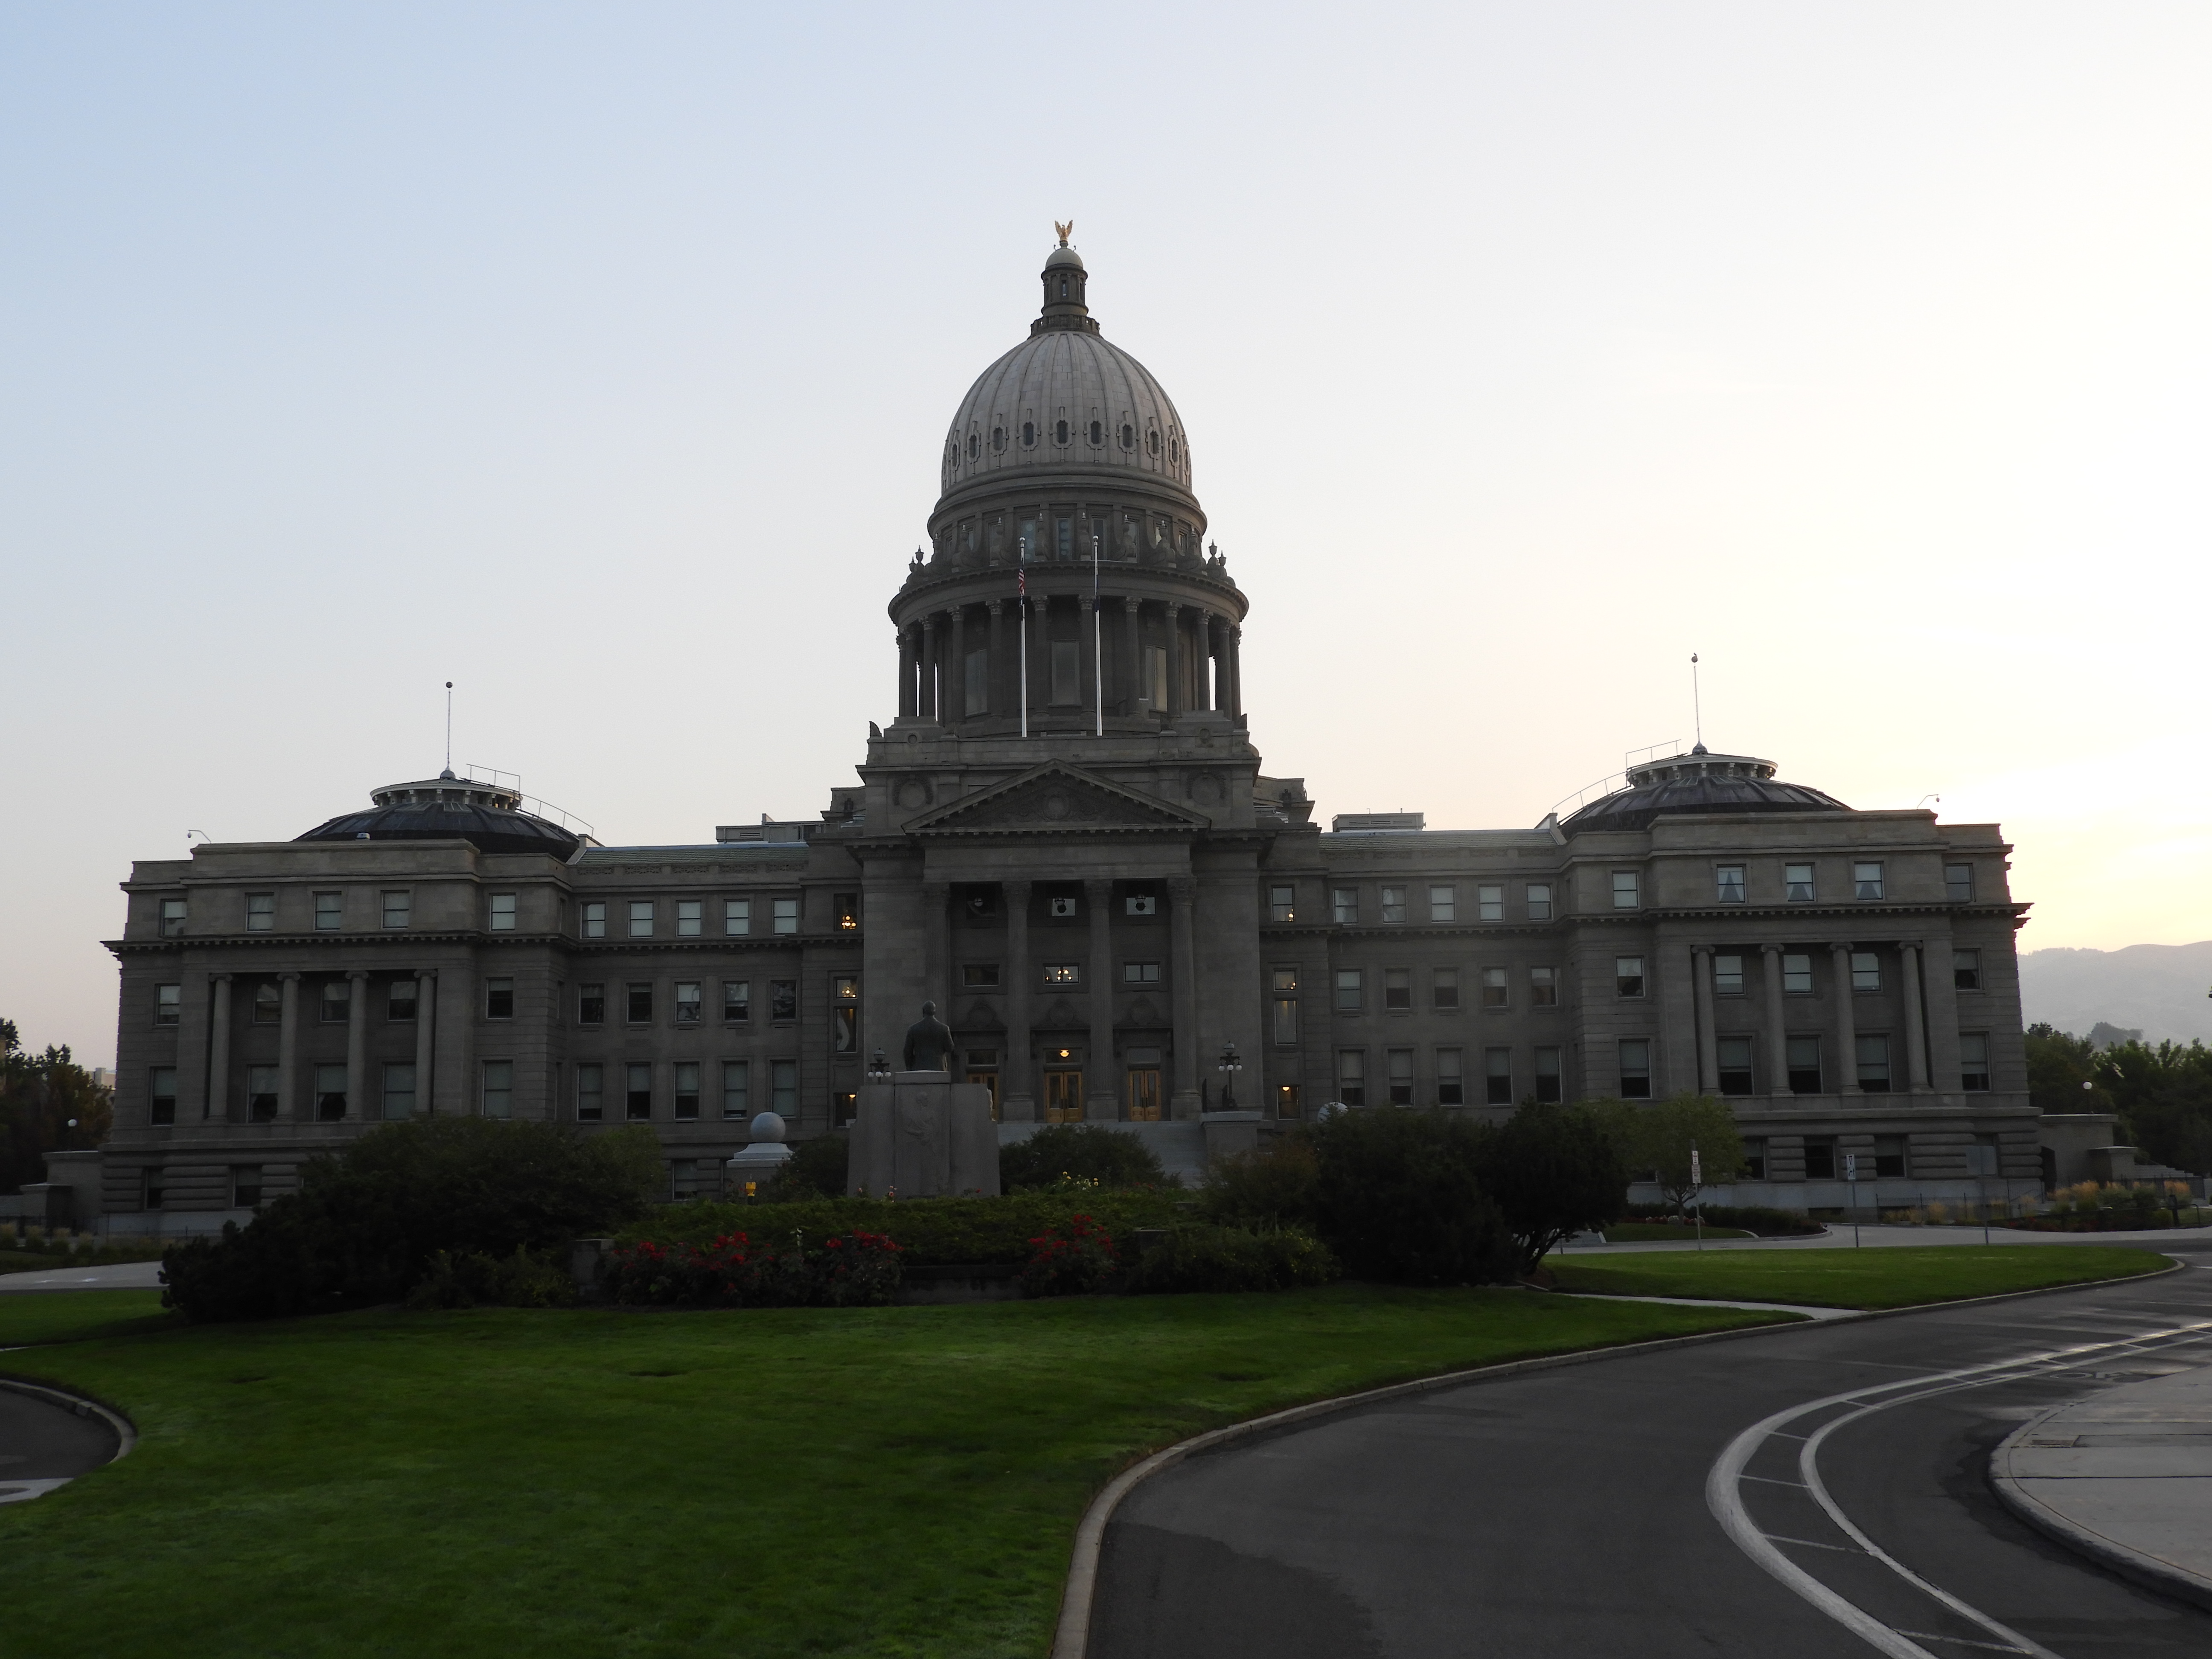 Idaho State Capitol Building #1 of 3